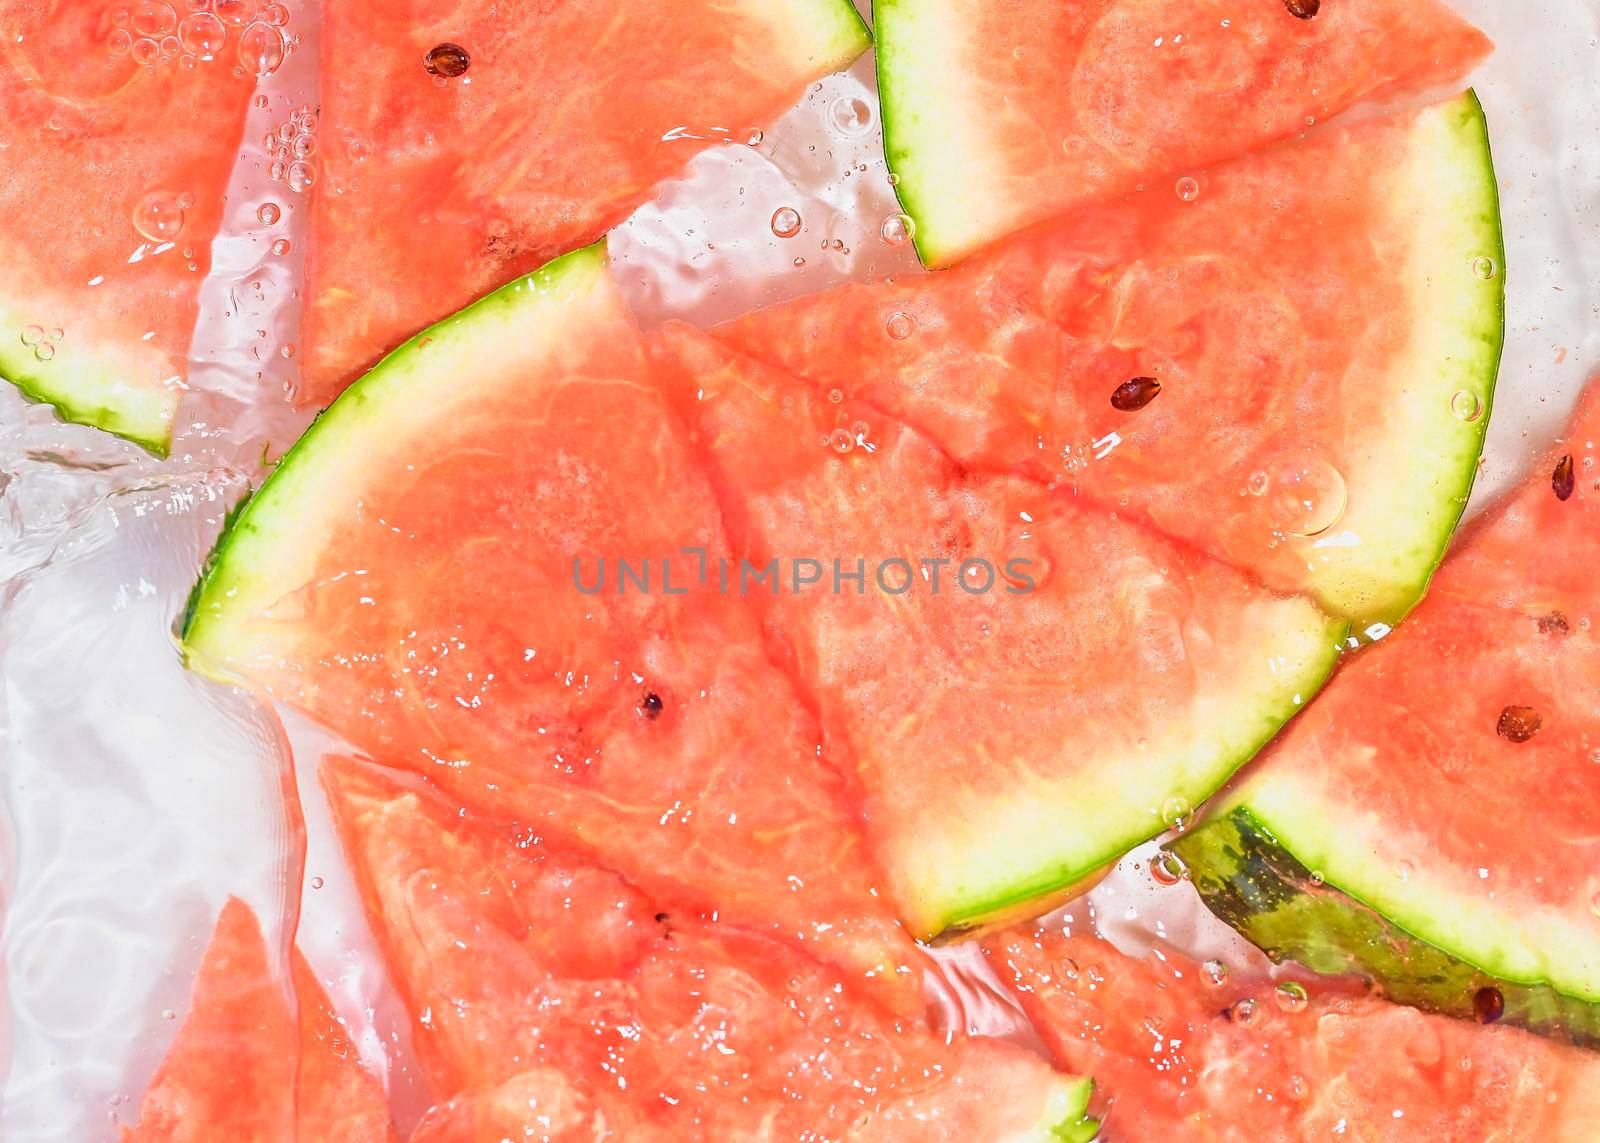 Slices of melon in water on white background. Melon close-up in liquid with bubbles. Slices of red ripe melon in water. Macro image of fruits in water.